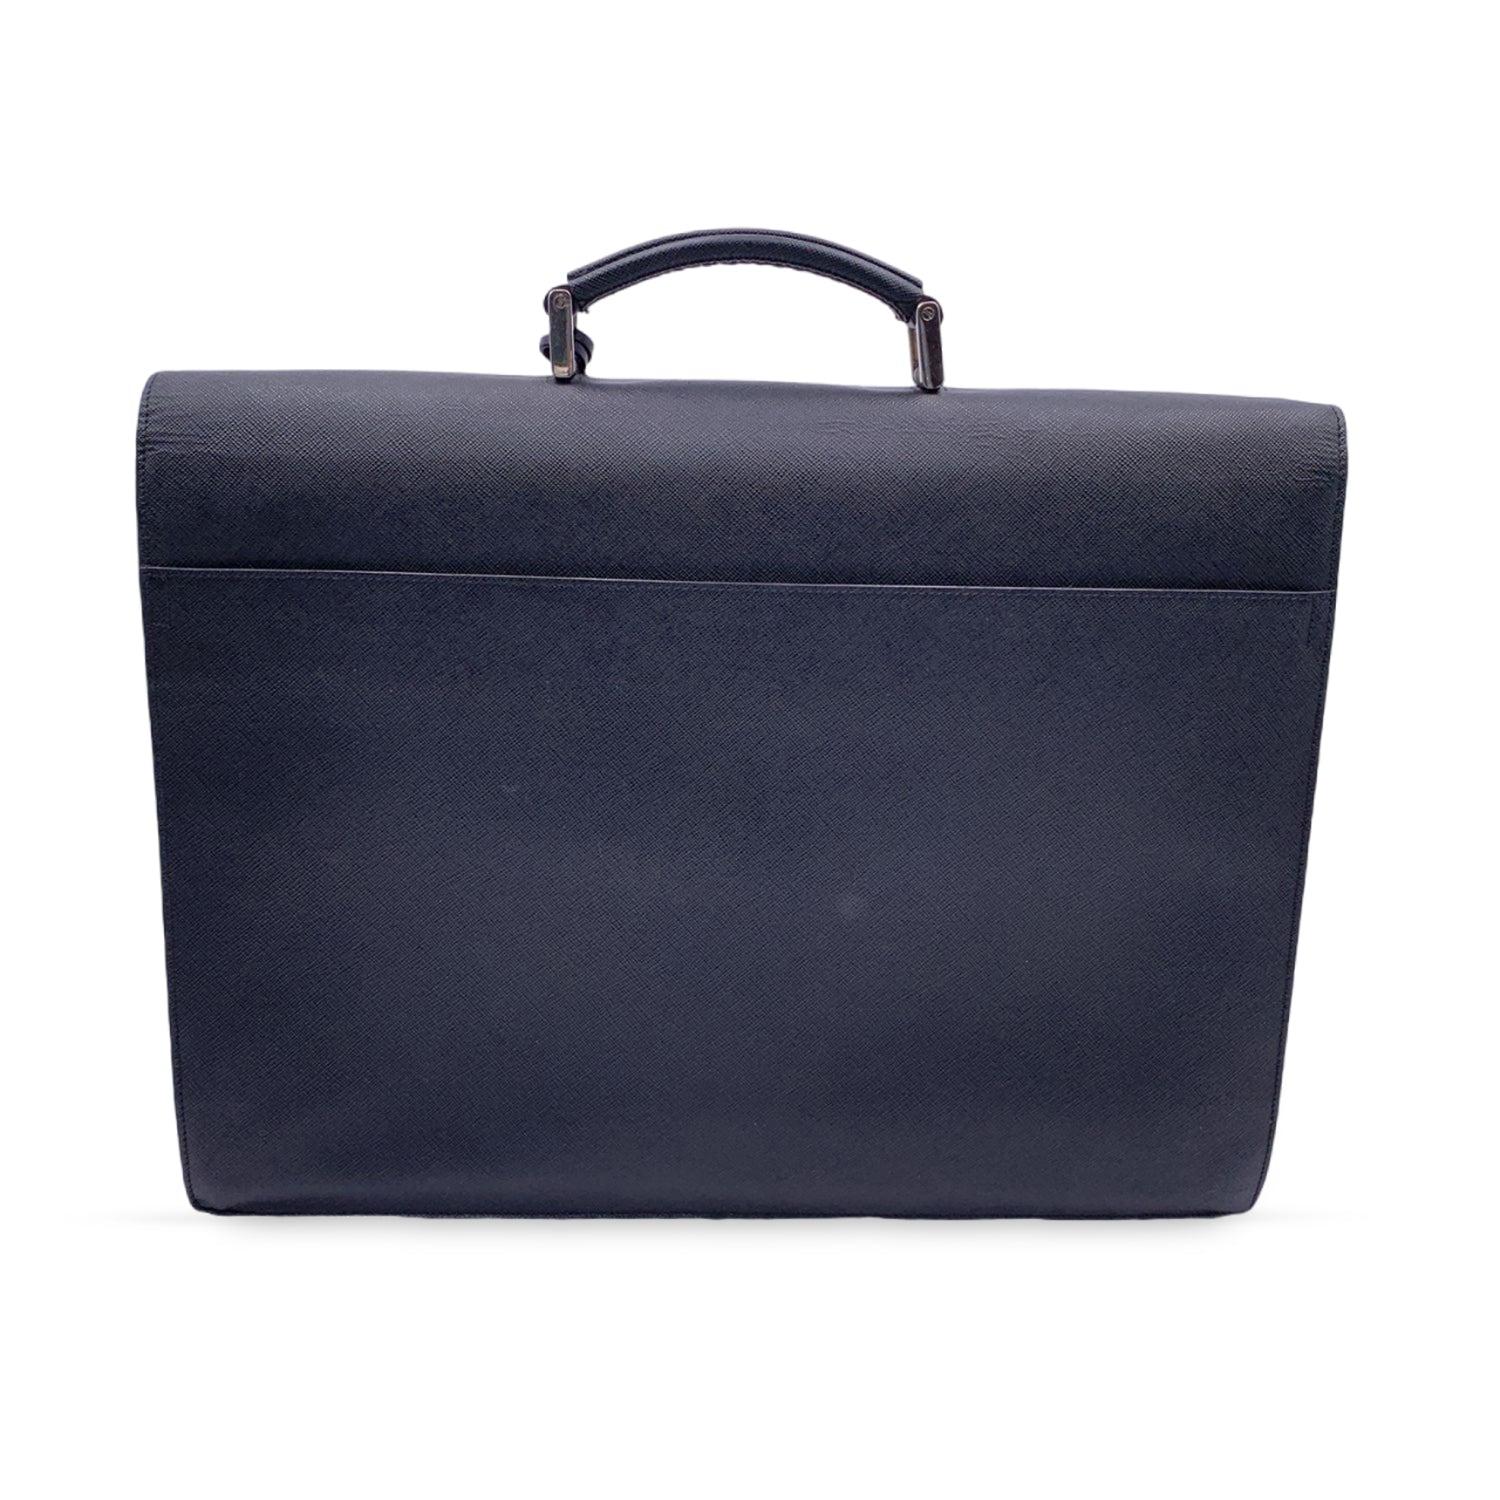 Prada Saffiano leather briefcase with 3 gussets. Polished steel hardware. Leather lining. Tag logo on the inside and engraved logo on push-lock closure. One handle. Flap with key closure (key is not included). 3 compartments with pleats organized